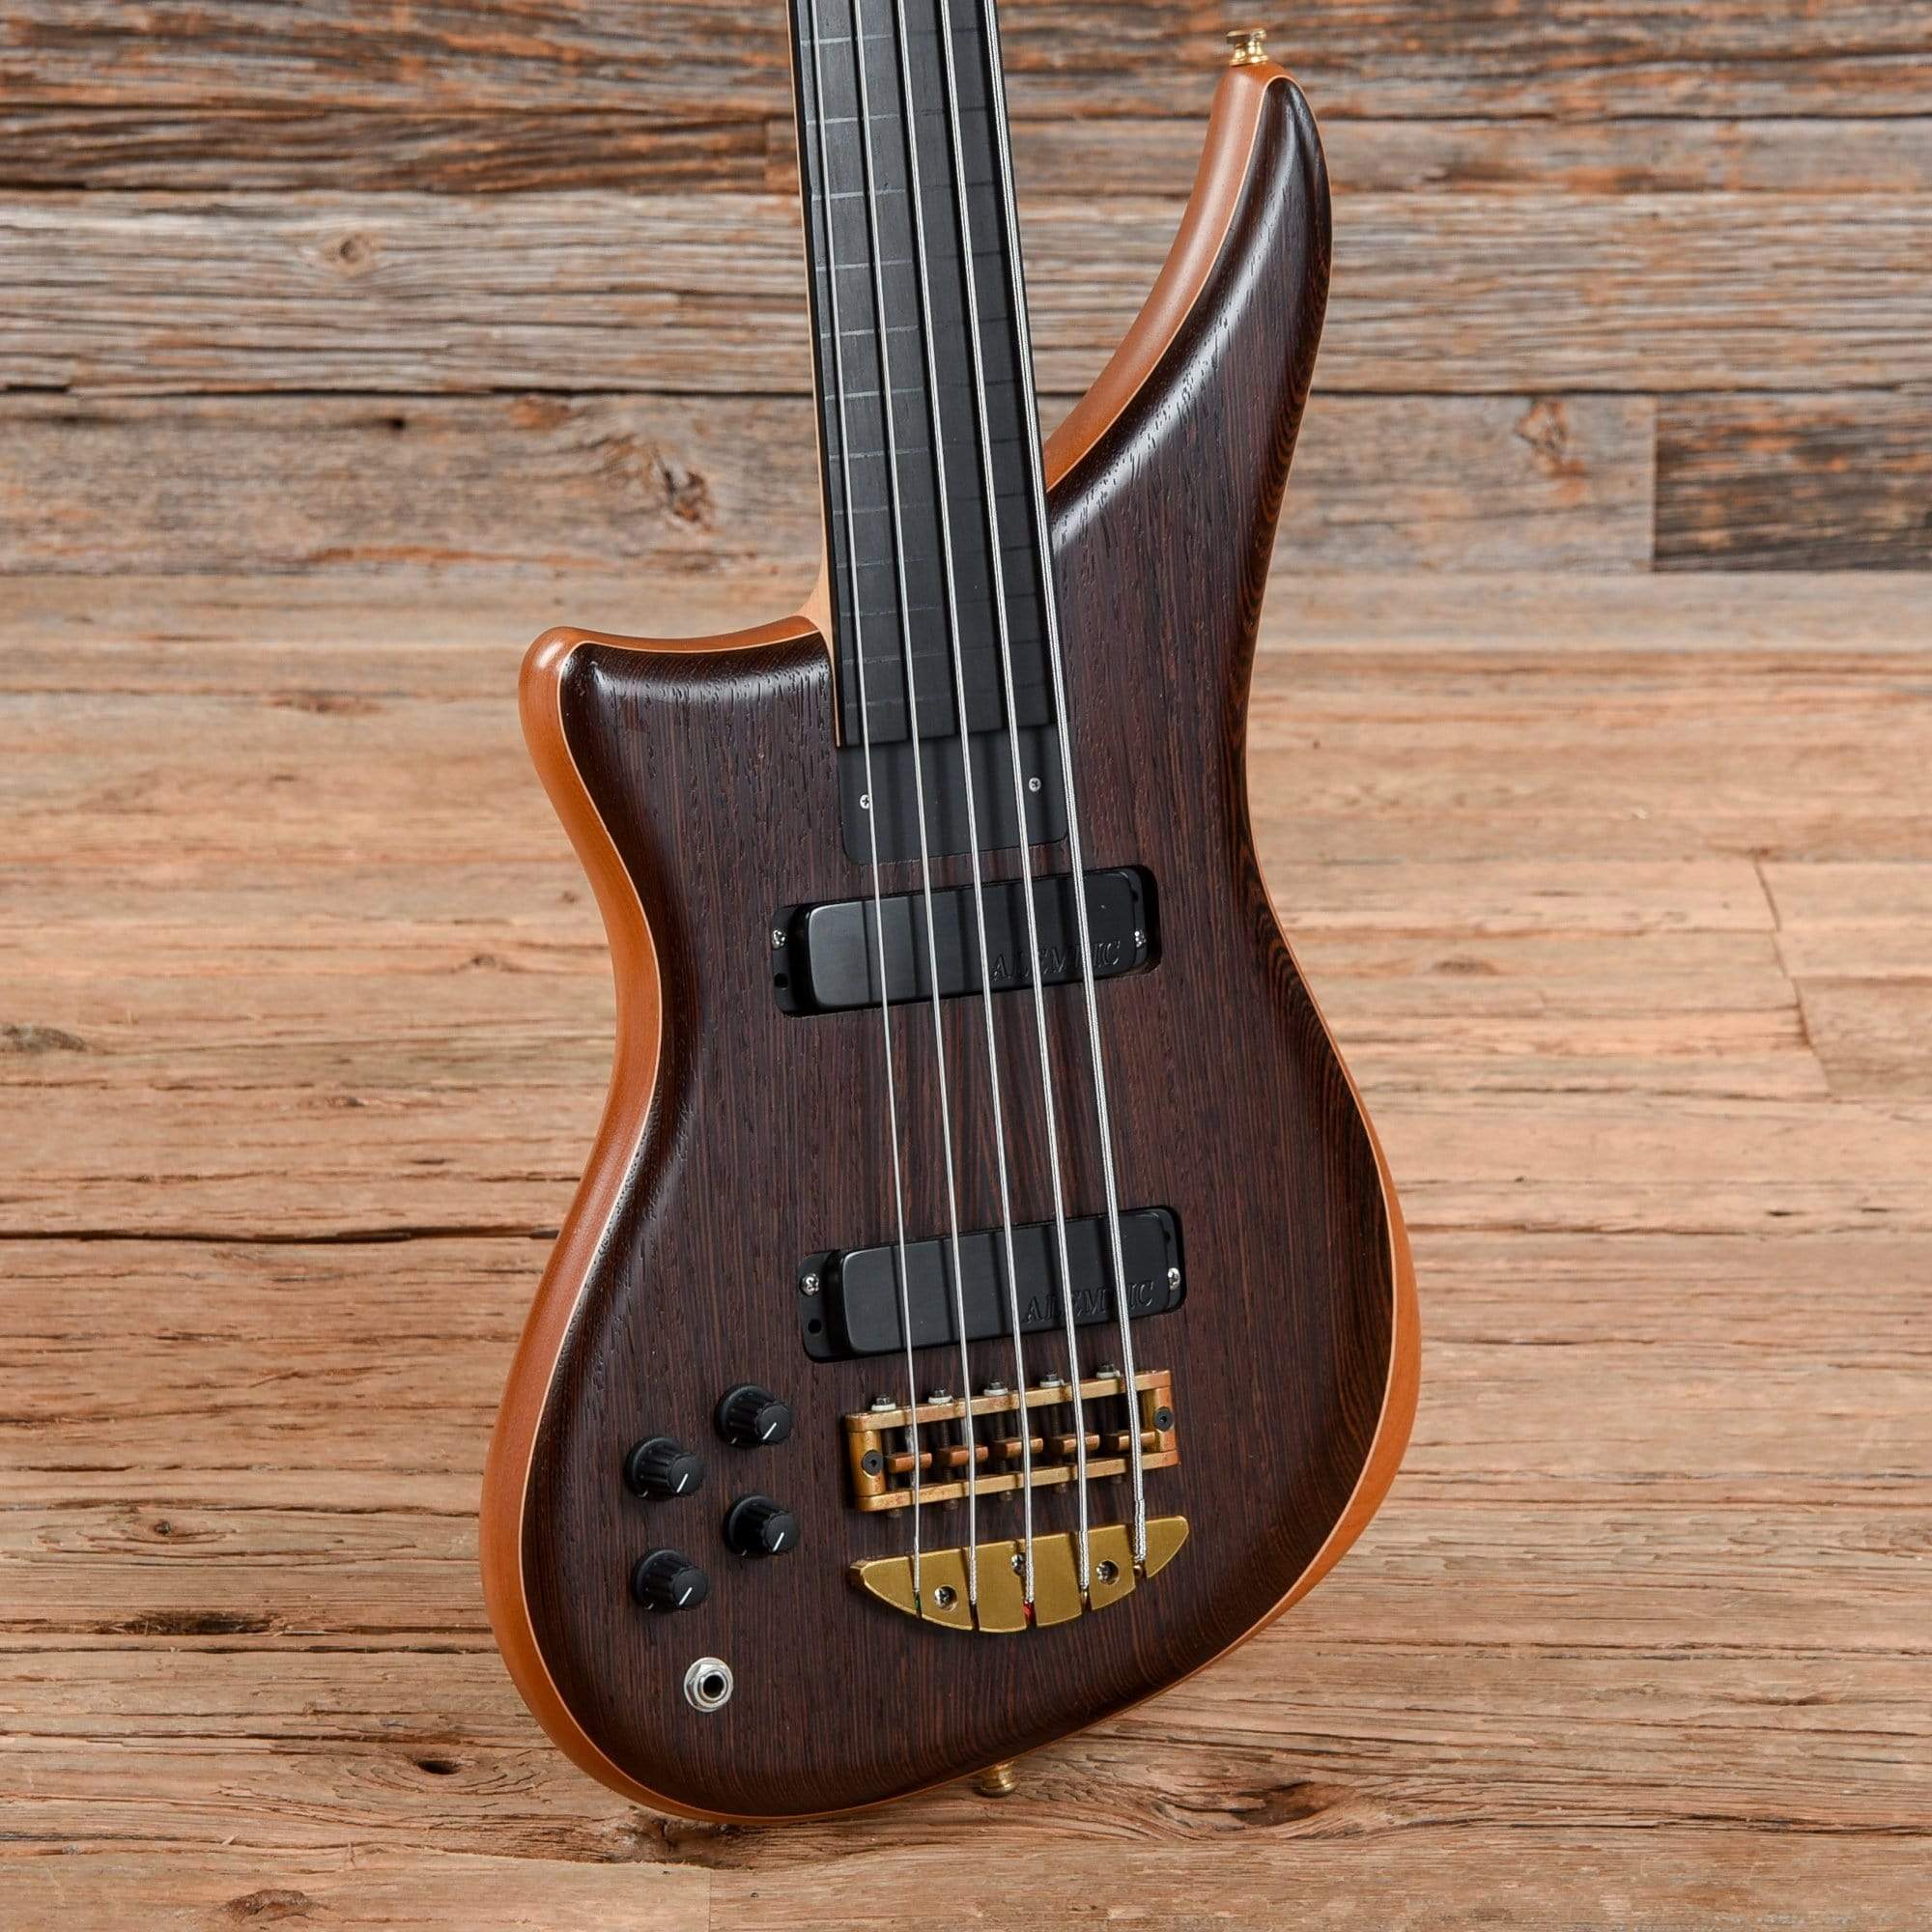 Alembic Epic 5 Wengé Top 1996 LEFTY Bass Guitars / 5-String or More,Bass Guitars / Left-Handed